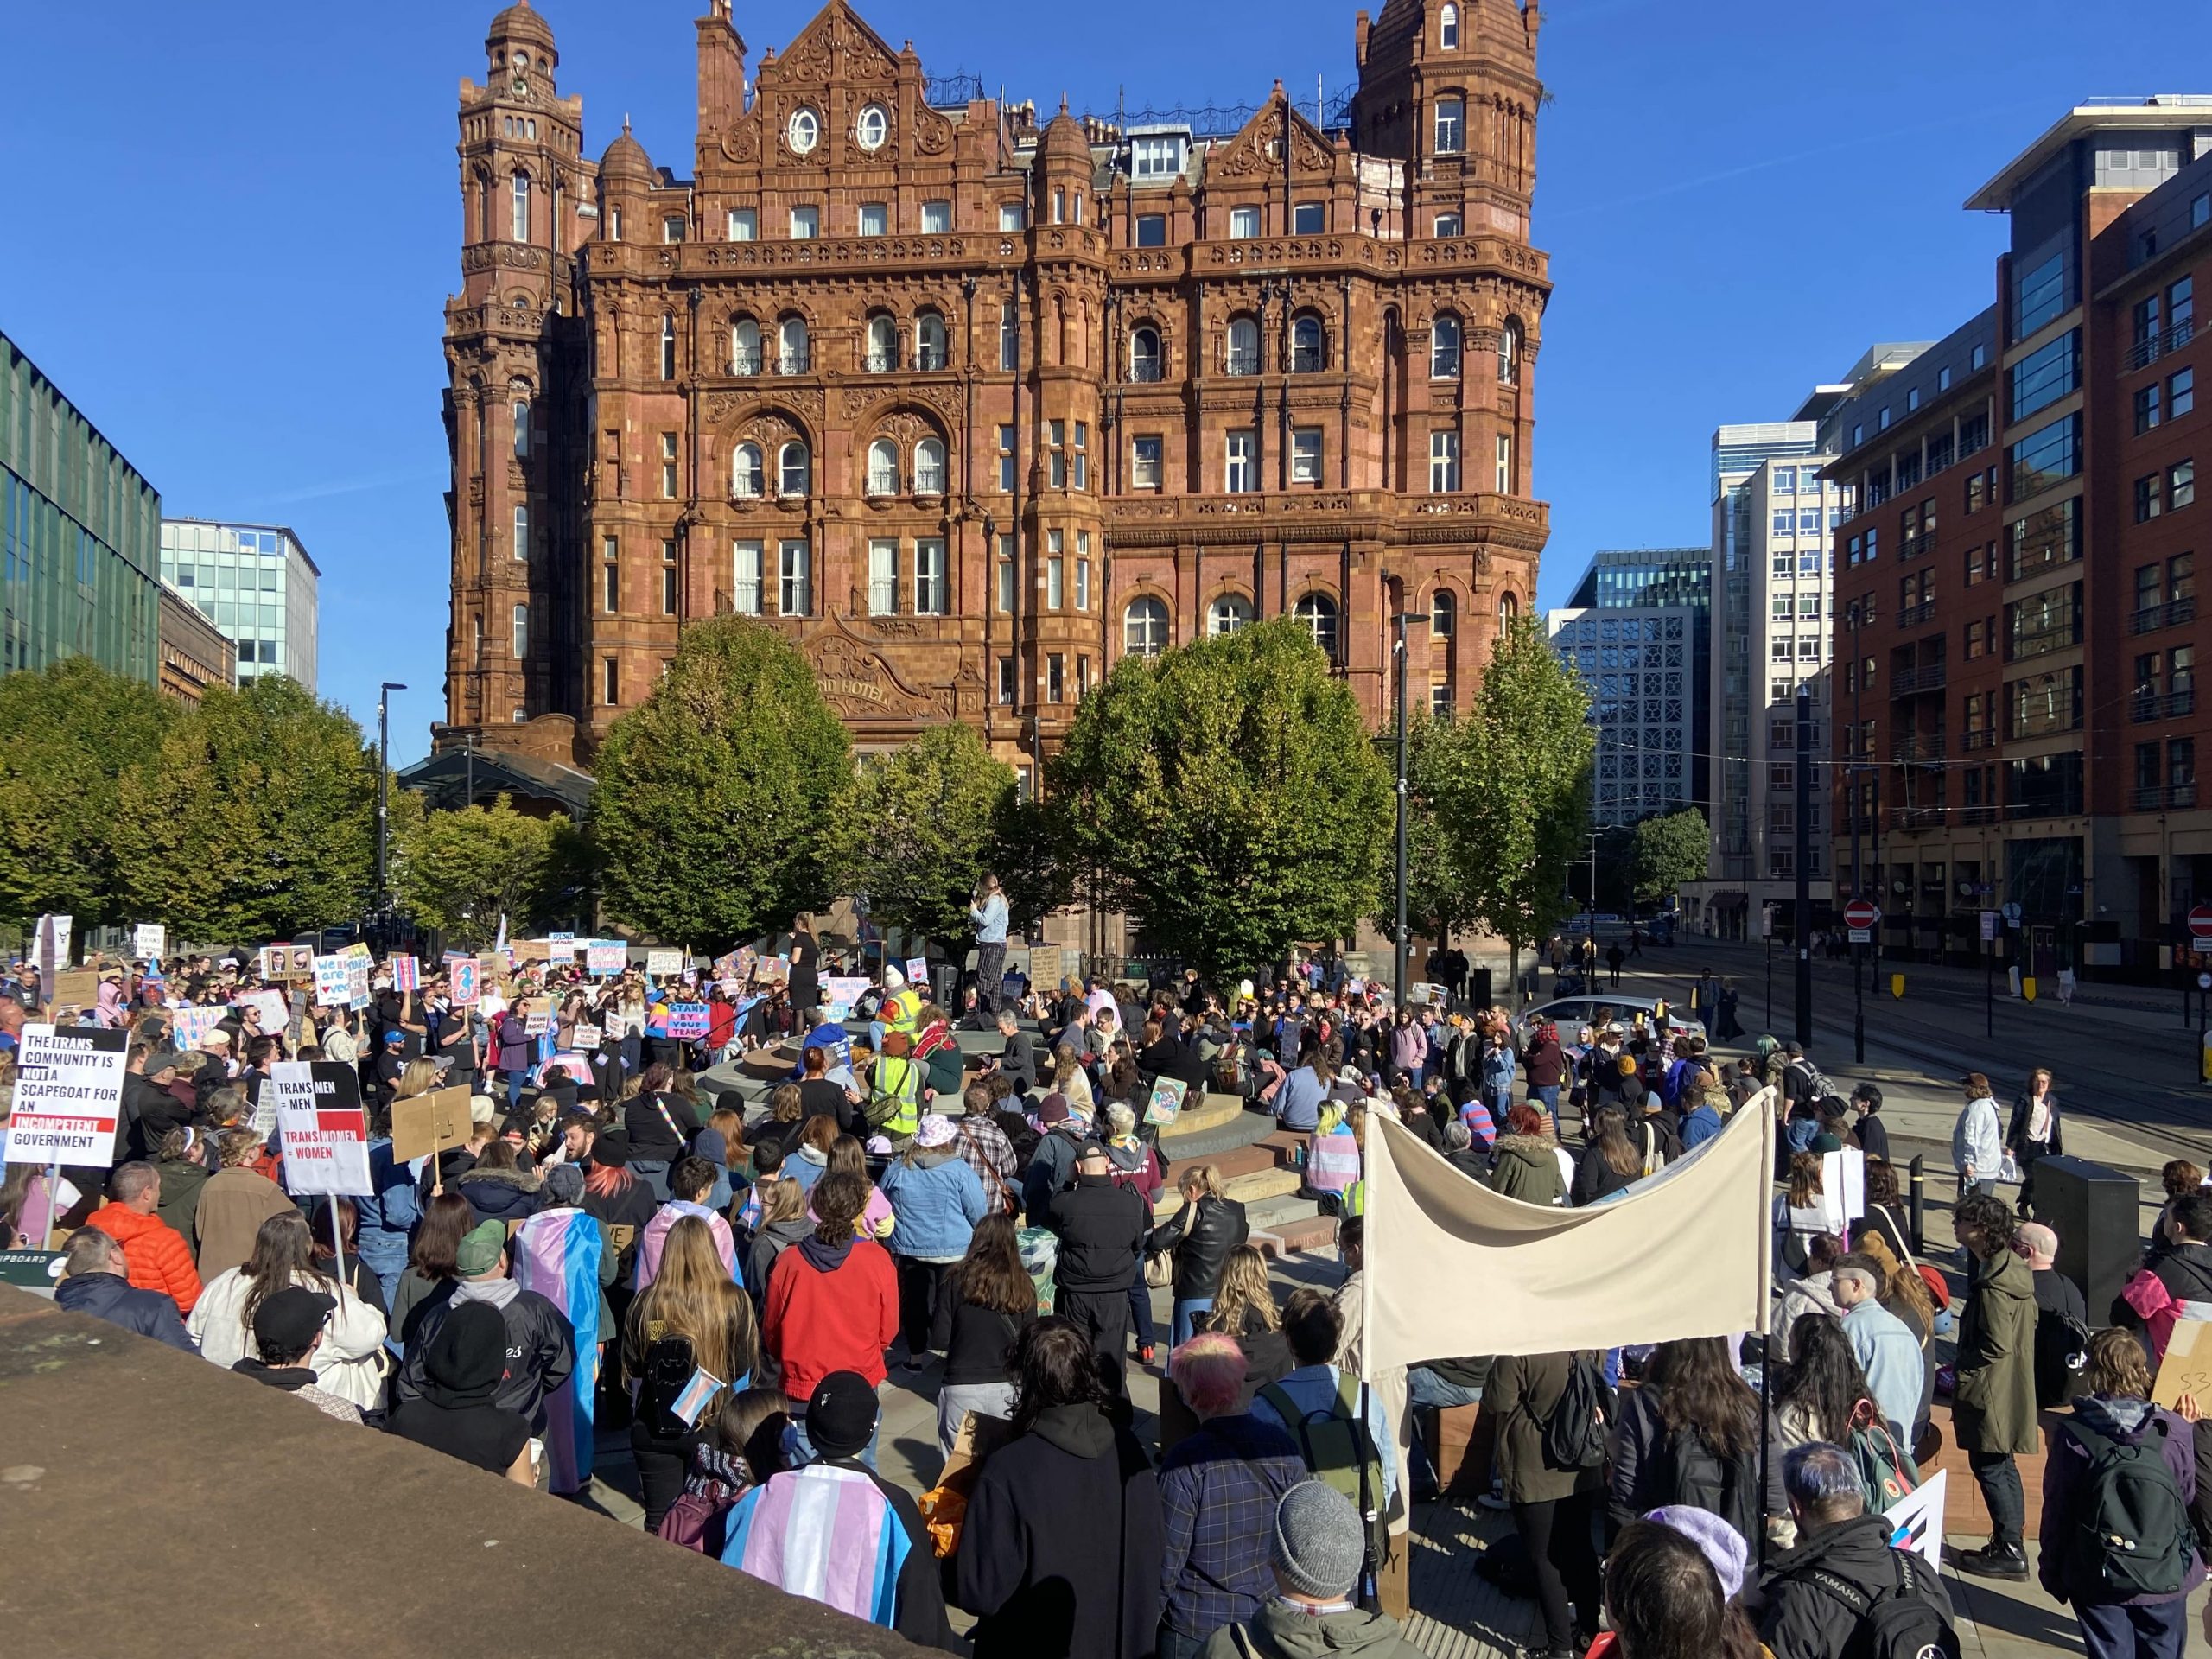 Protestors gathered in Manchester to show their support for the trans community. Image credit Poppy Smart.